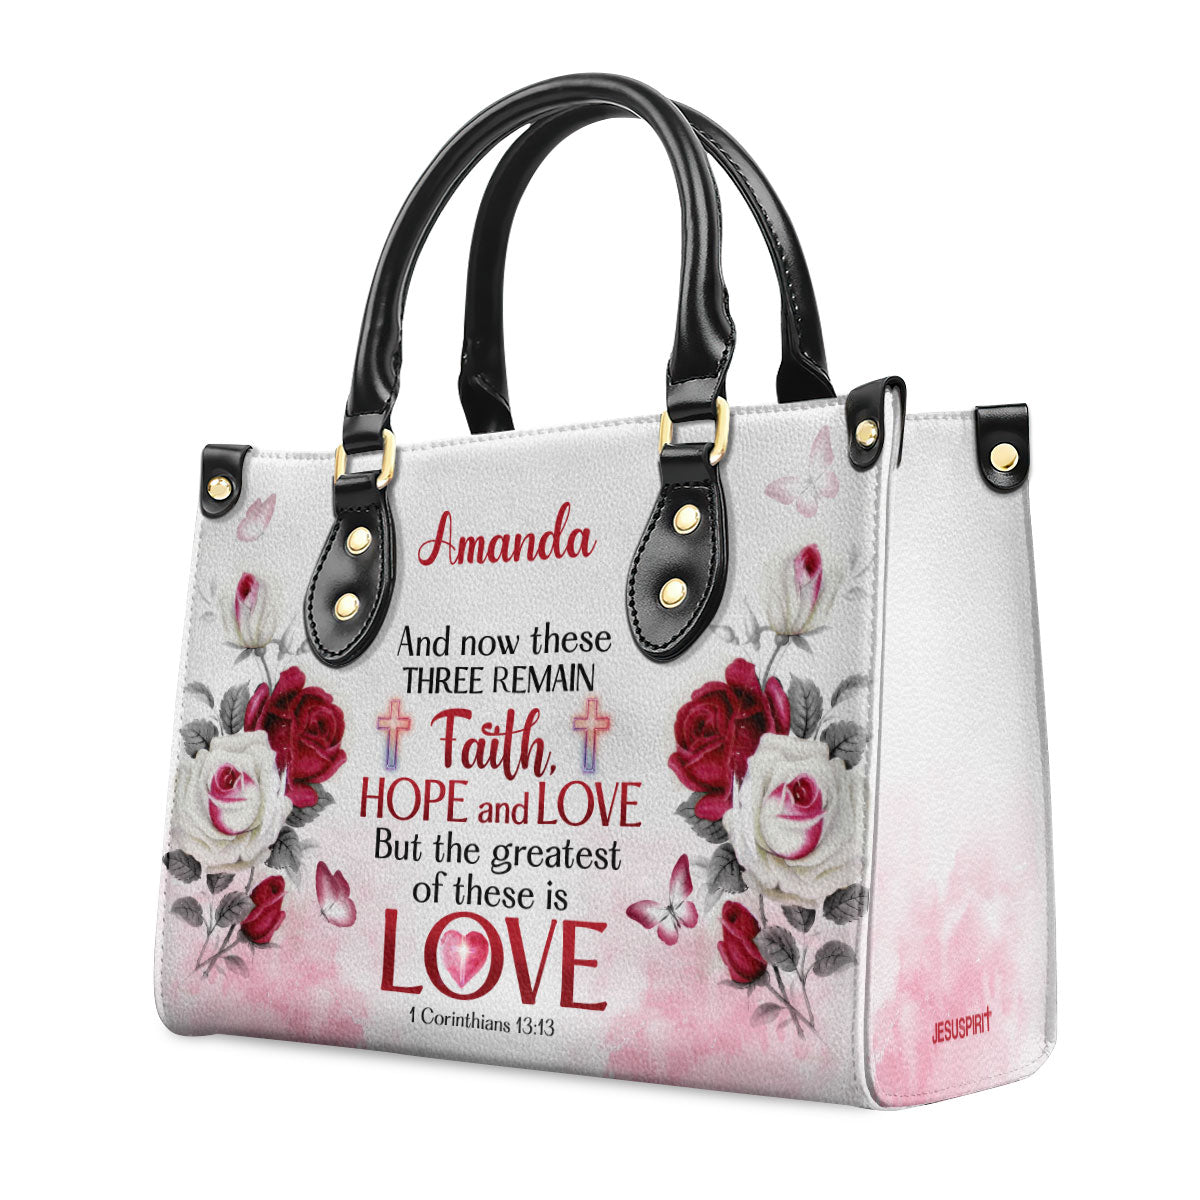 Jesuspirit | Corinthians 13:13 | Inspirational Gifts With Bible Verse For Christian Women | Personalized Leather Handbag With Handle LHBM711